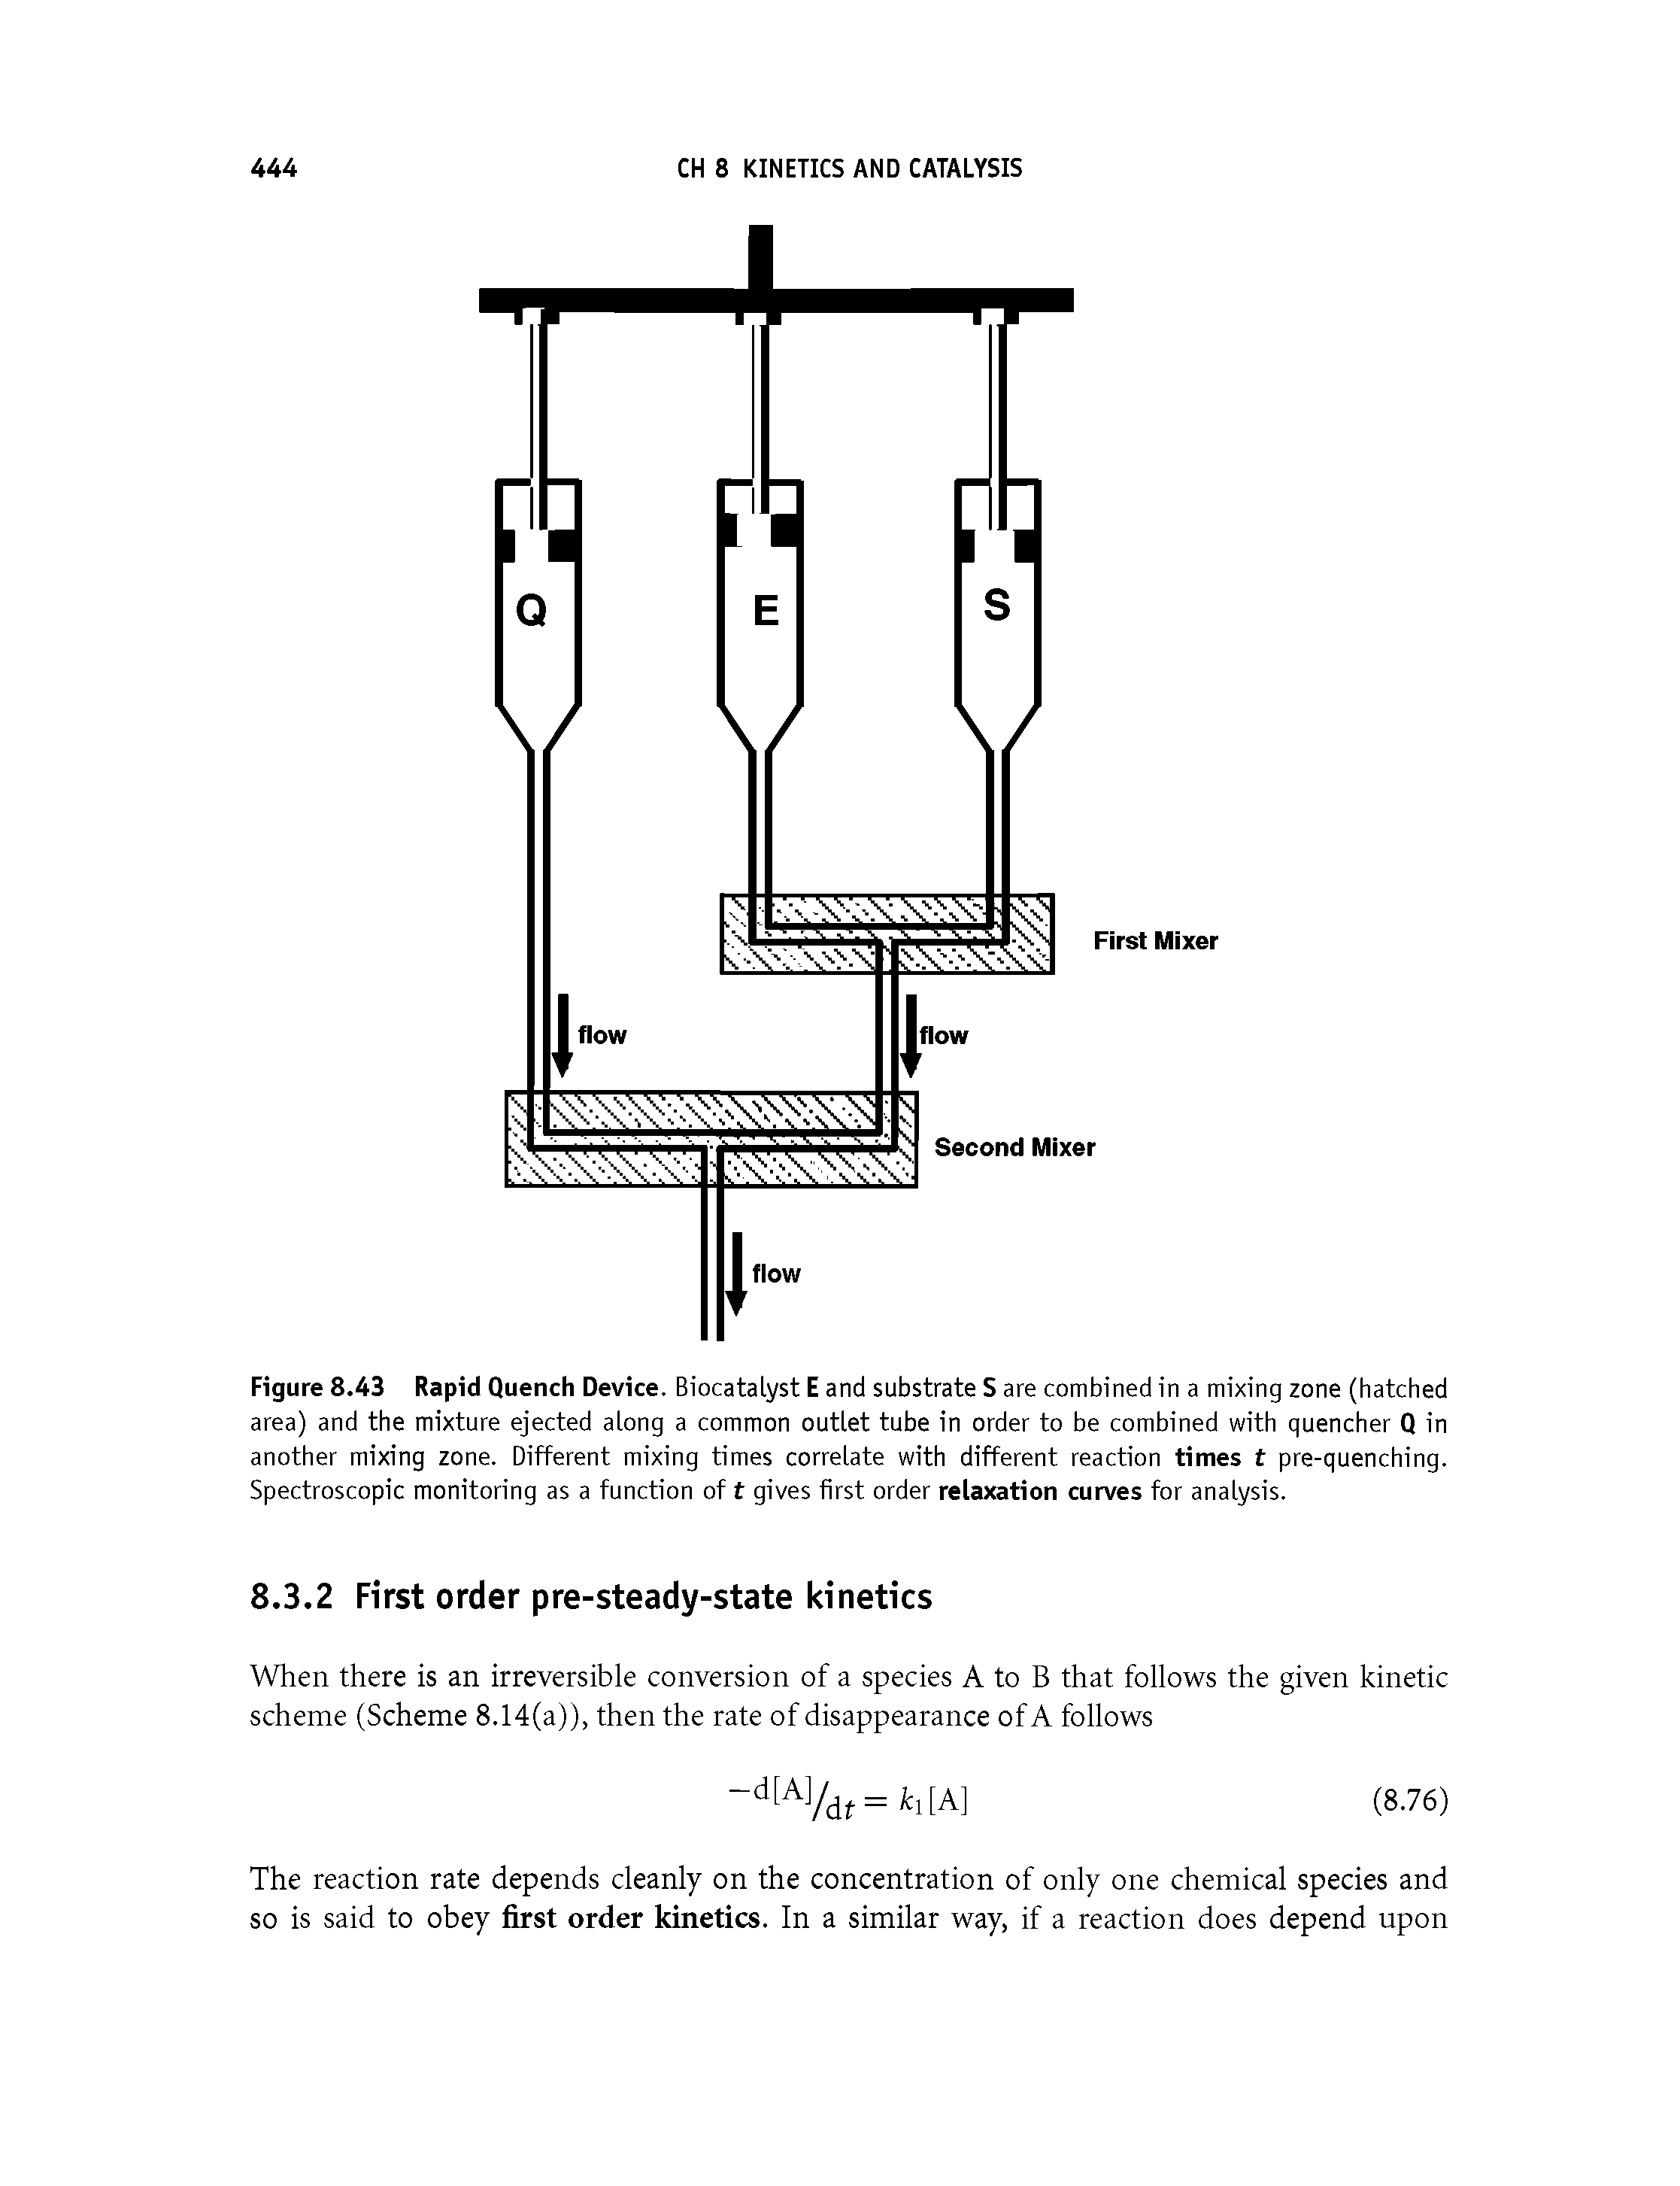 Figure 8.43 Rapid Quench Device. Biocatalyst E and substrate S are combined in a mixing zone (hatched area) and the mixture ejected along a common outlet tube in order to be combined with quencher Q in another mixing zone. Different mixing times correlate with different reaction times t pre-quenching. Spectroscopic monitoring as a function of t gives first order relaxation curves for analysis.